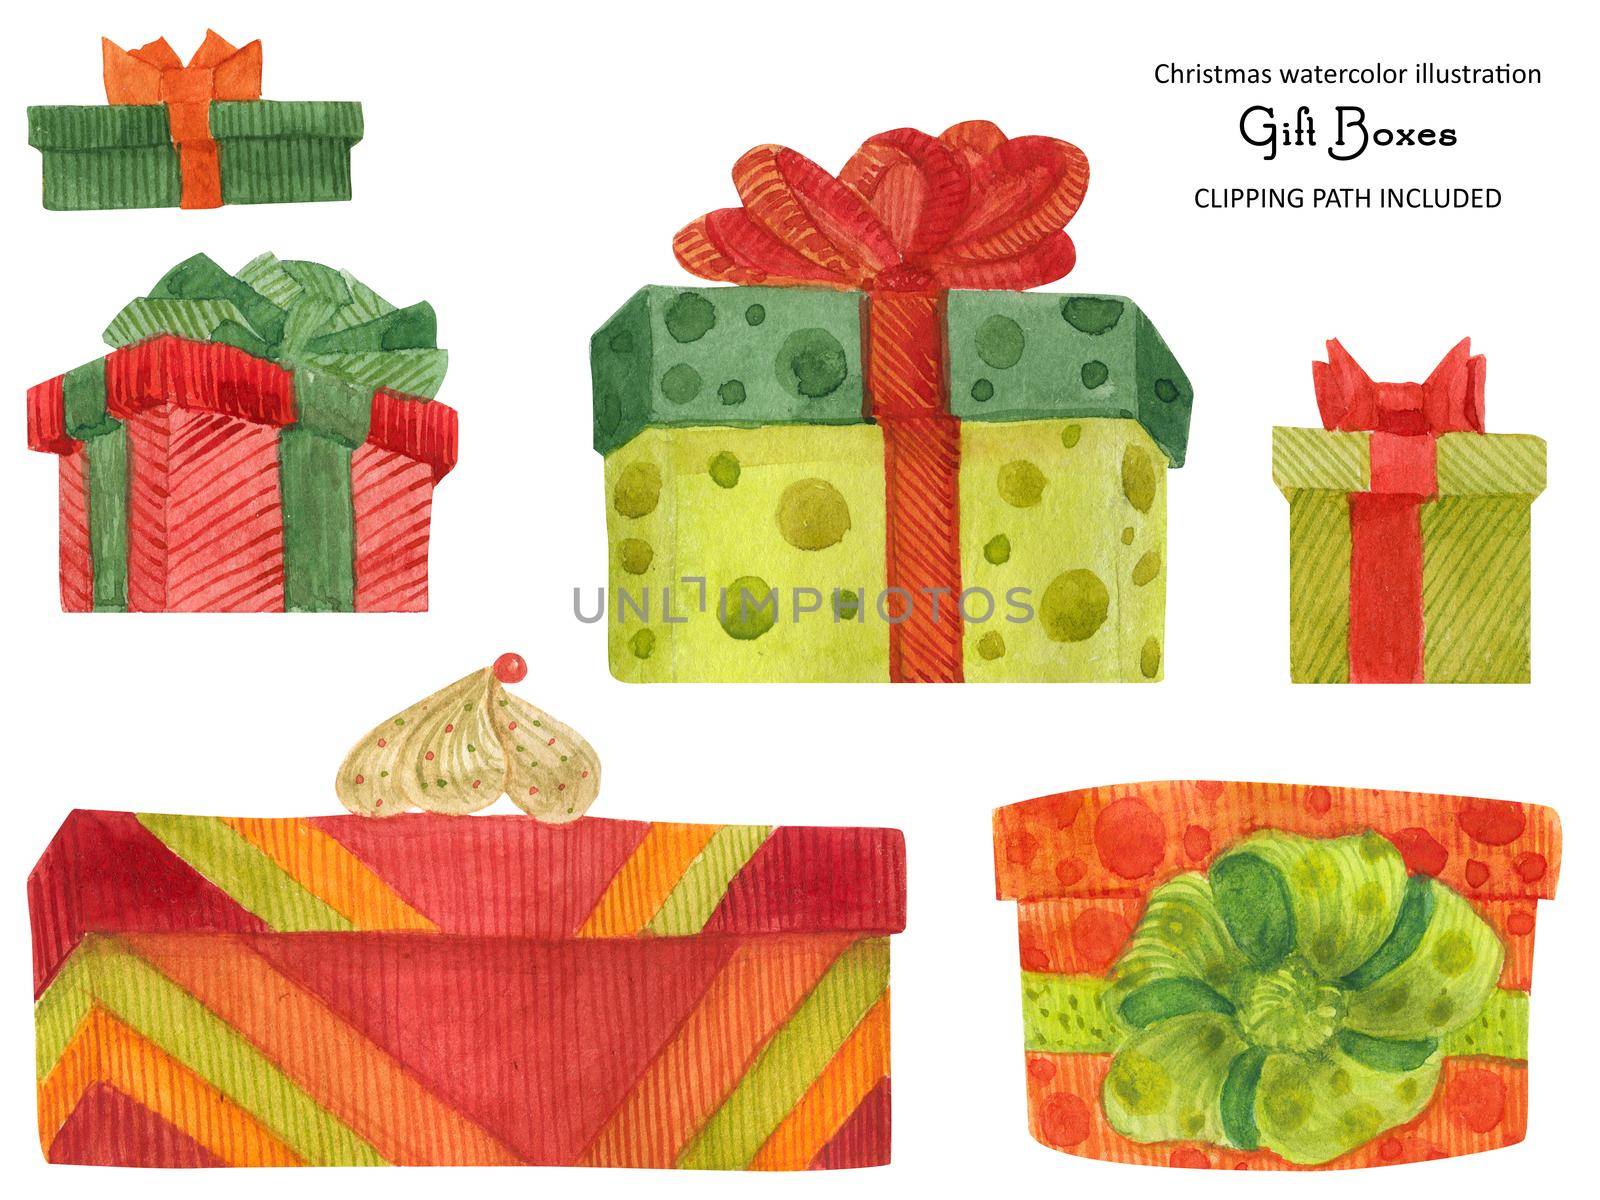 Christmas gift boxes, watercolor illustration by Xeniasnowstorm